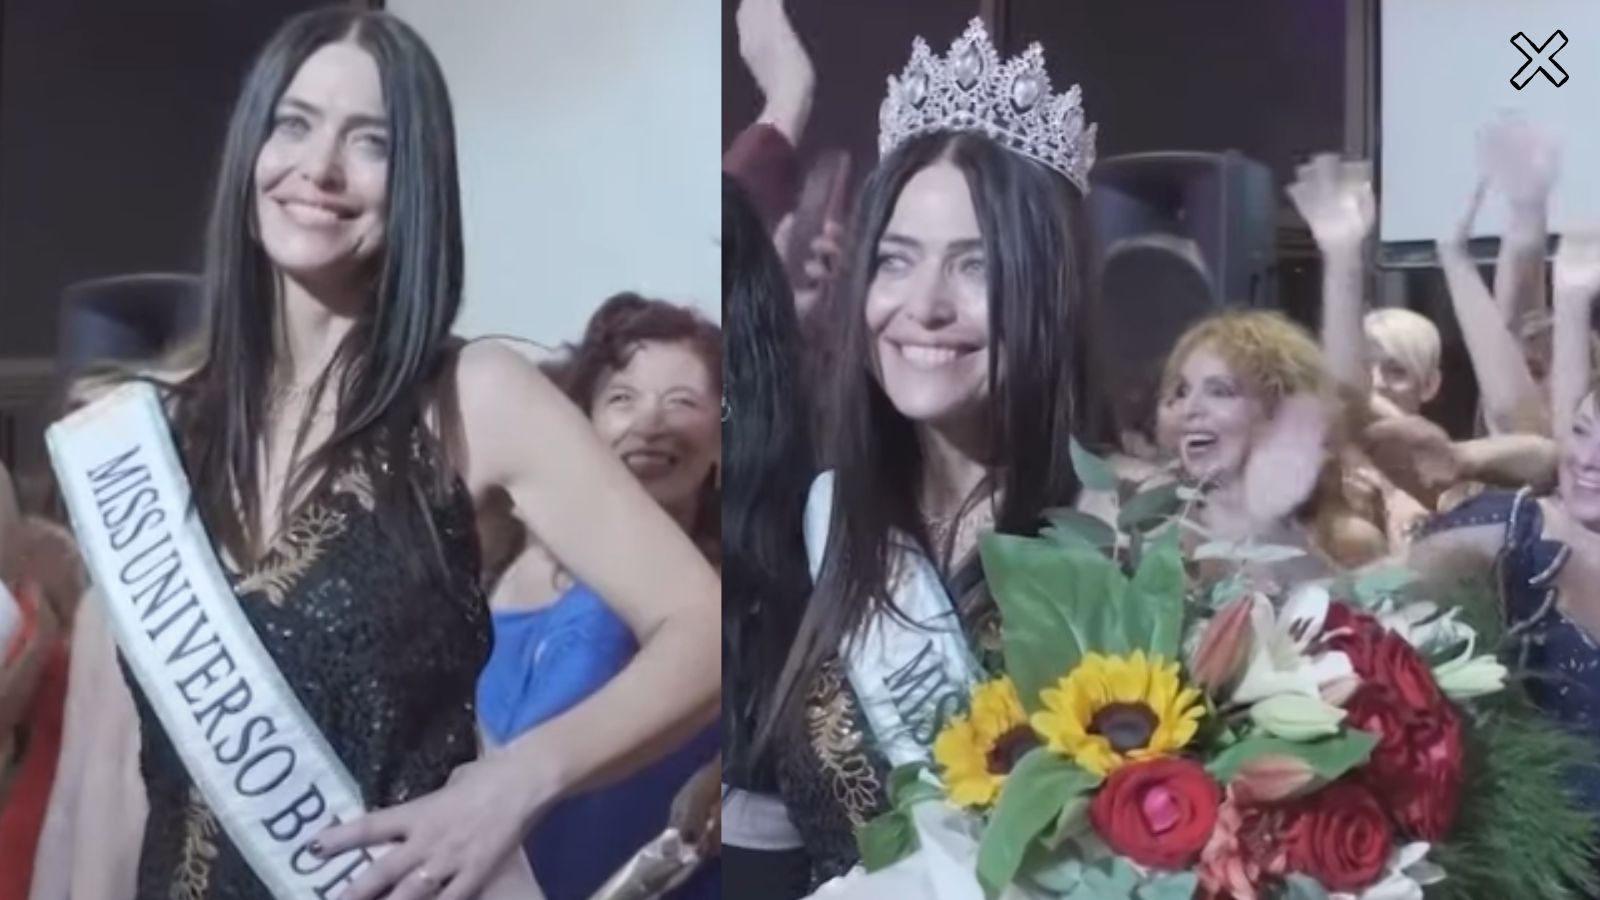 android, 60-year-old woman wins miss universe buenos aires pageant, shatters stereotypes, creates history